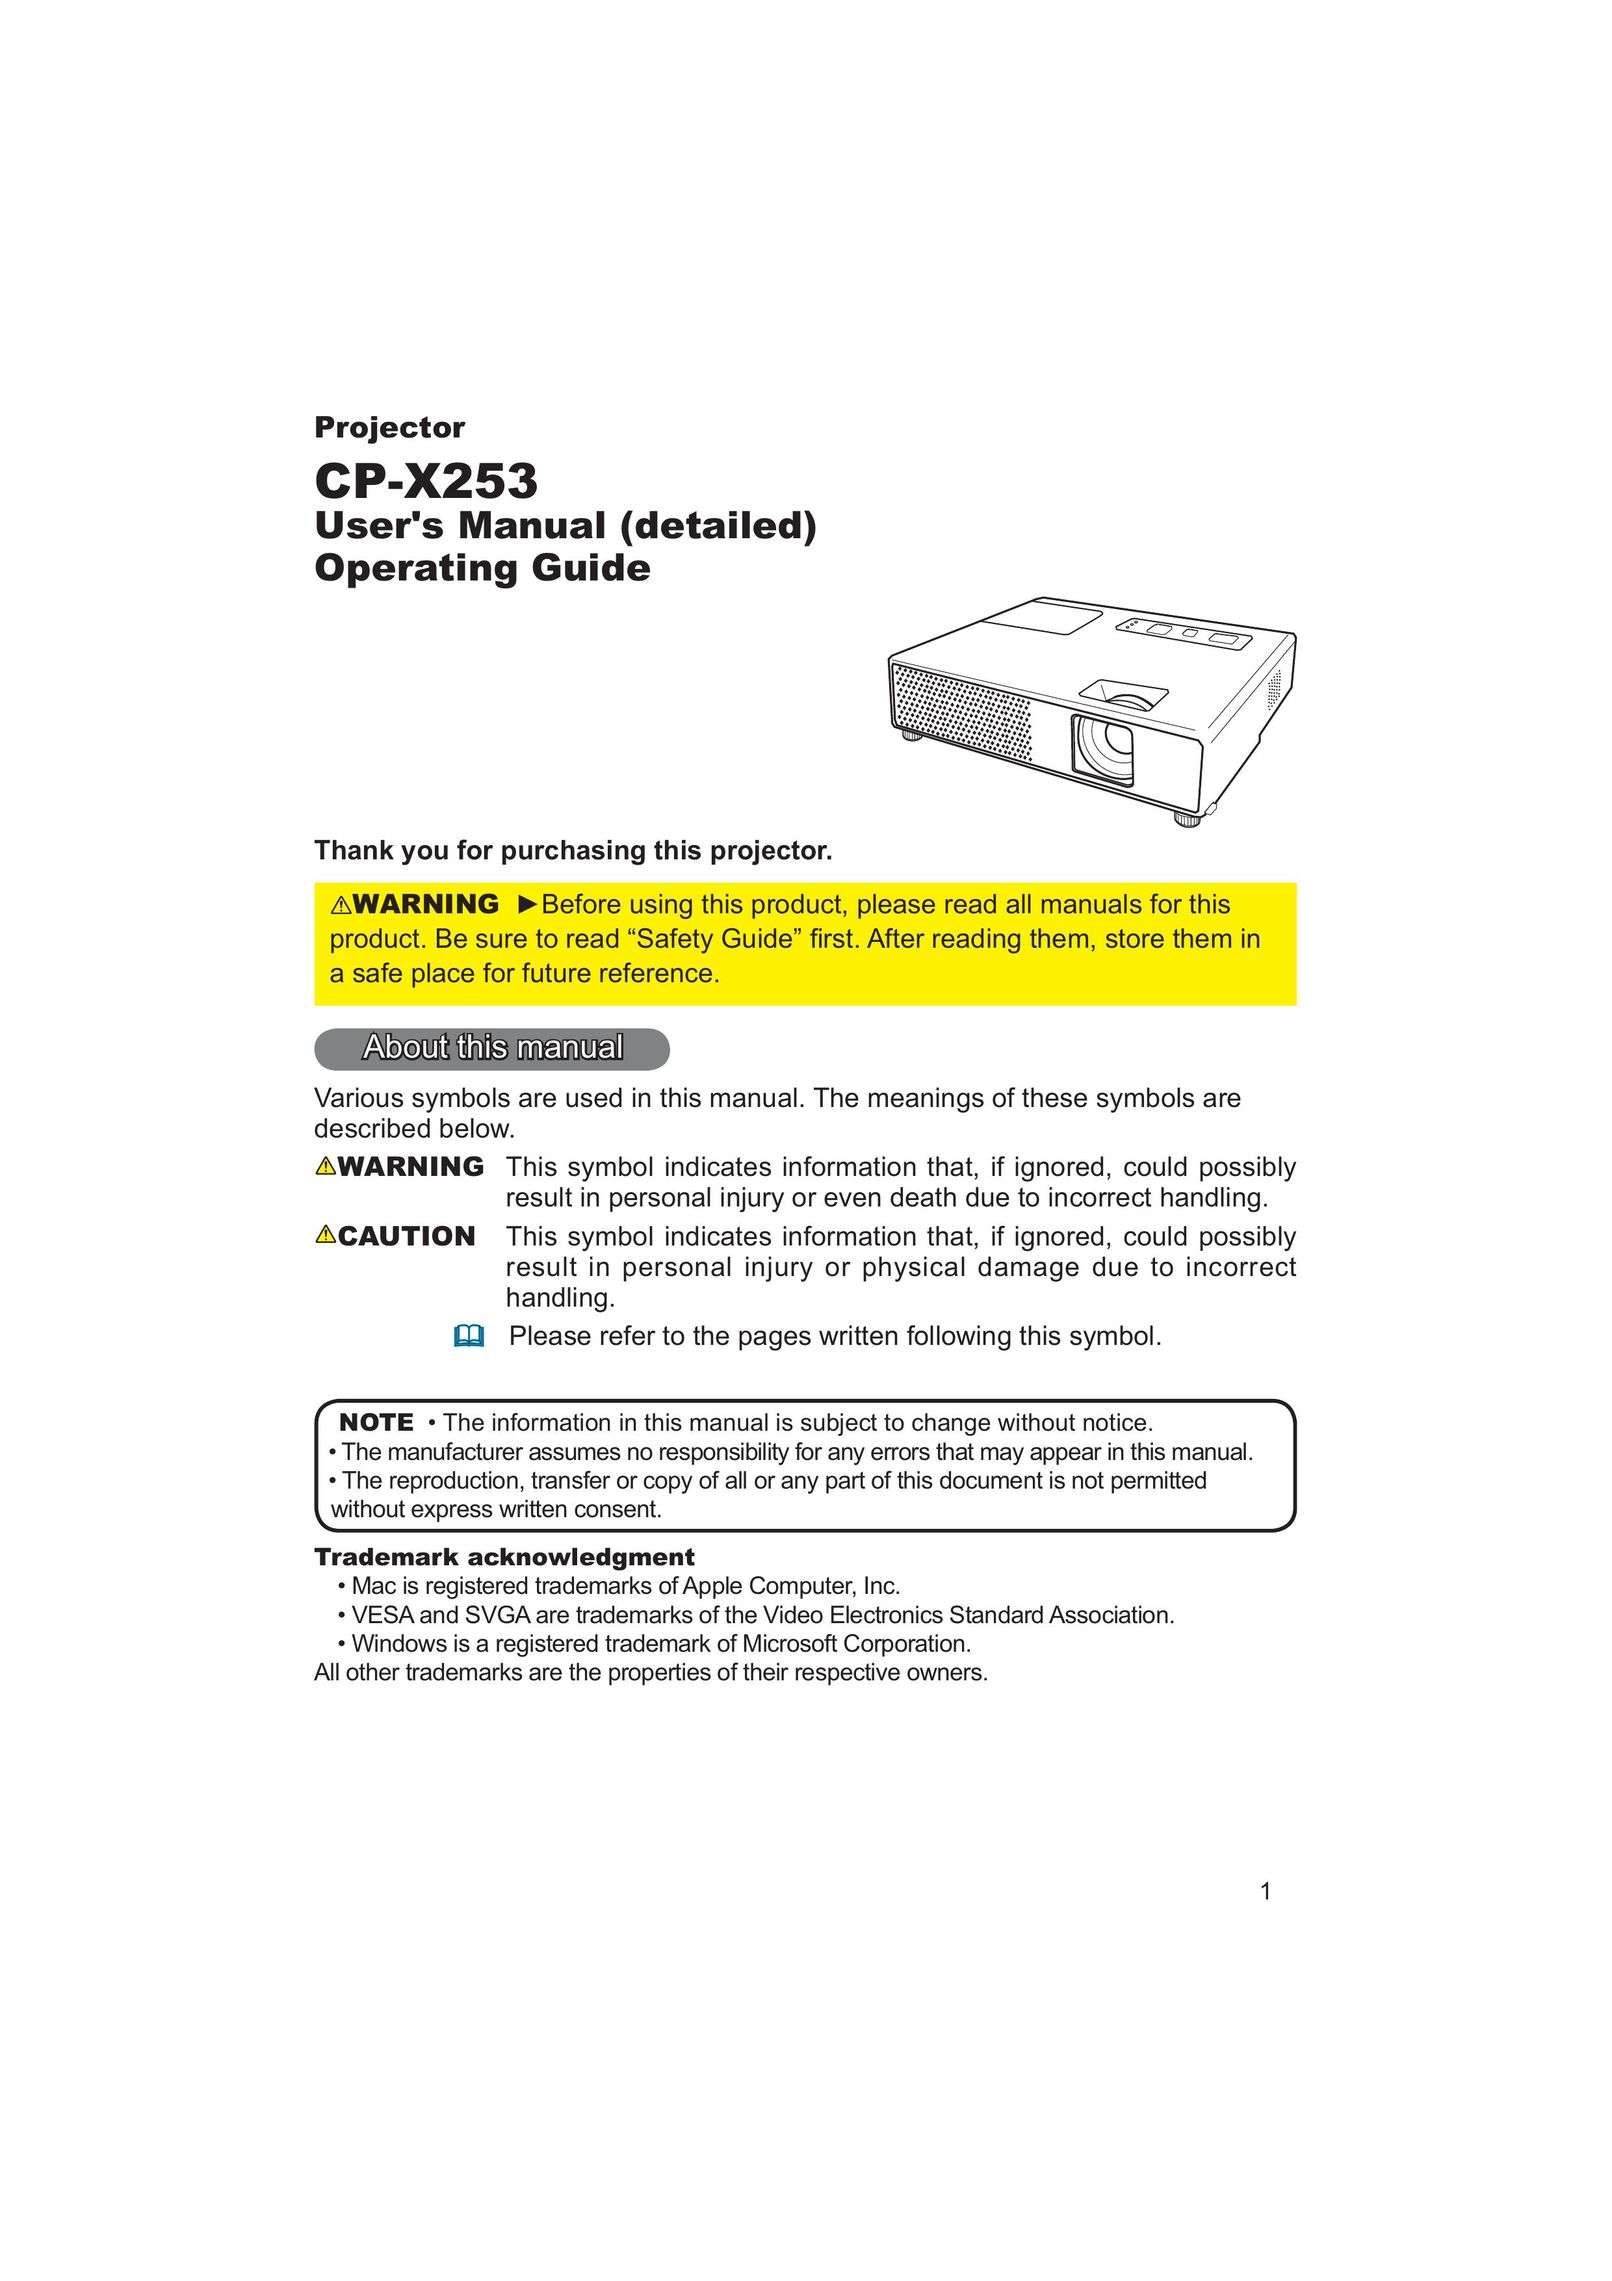 Apple CP-X253 Projector User Manual